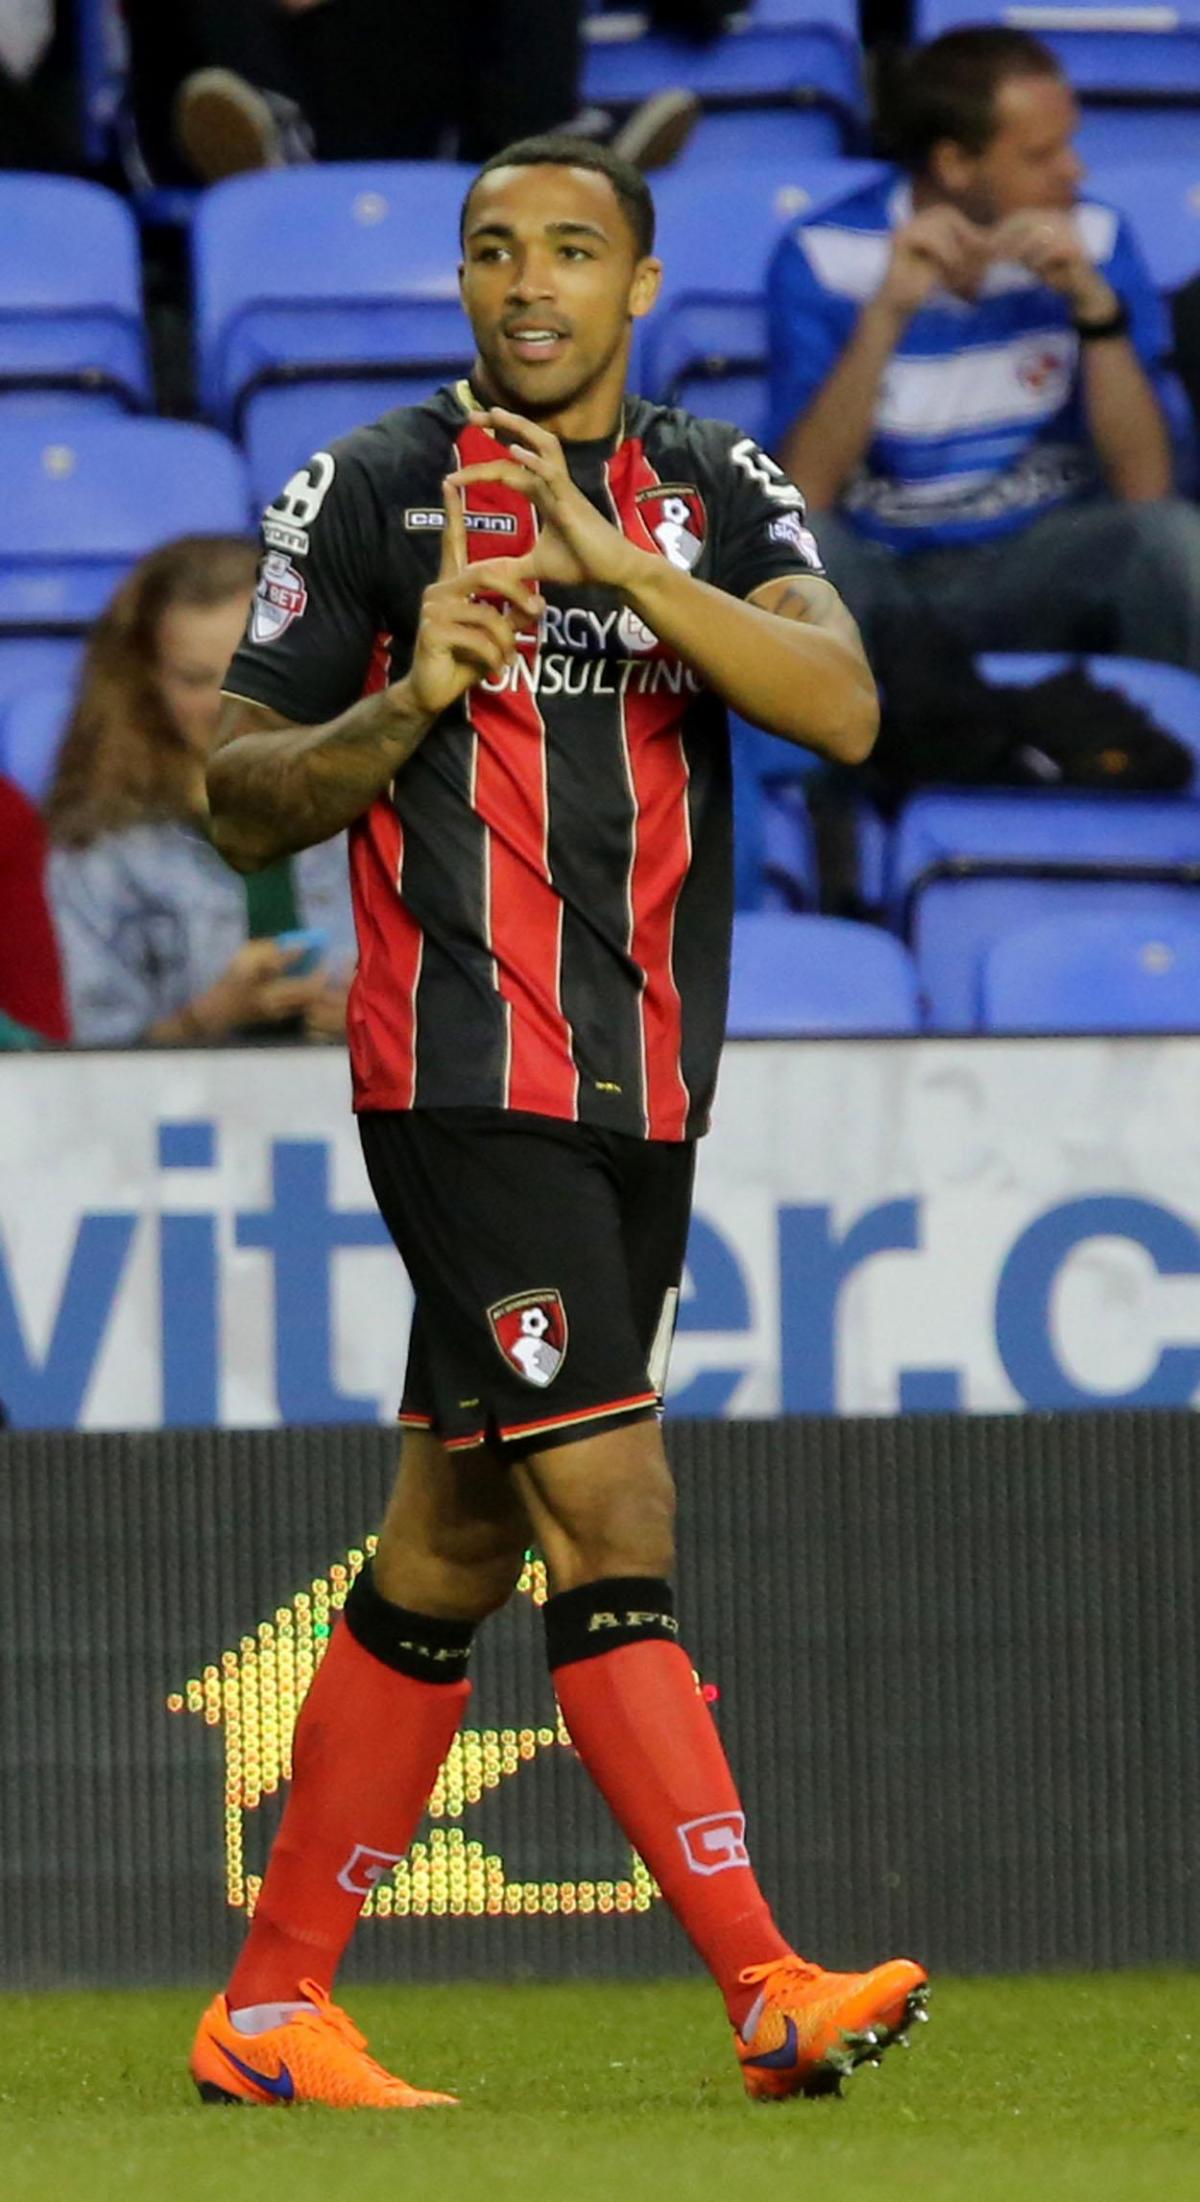 All the pictures of Reading v AFC Bournemouth on Tuesday April 14, 2015 by Richard Crease